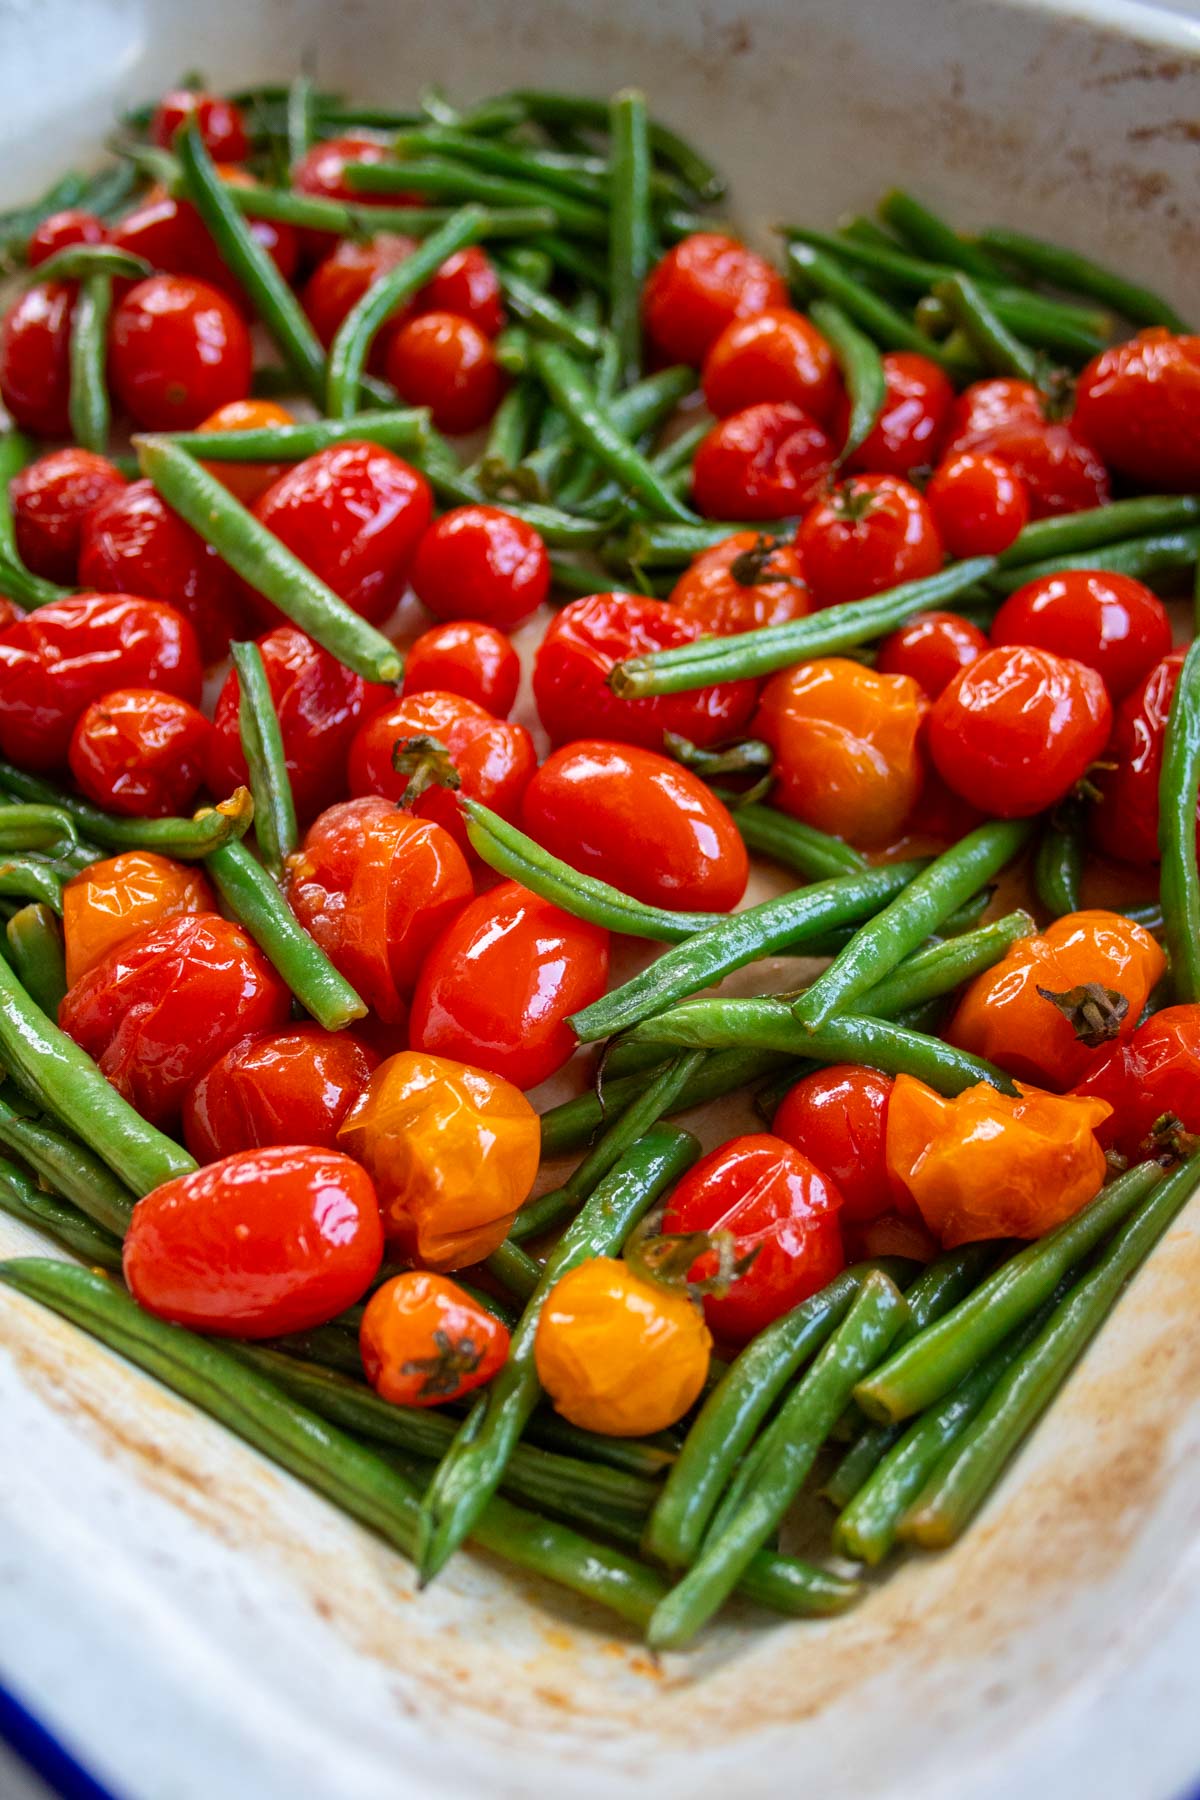 roasted green beans and tomatoes in a baking tray